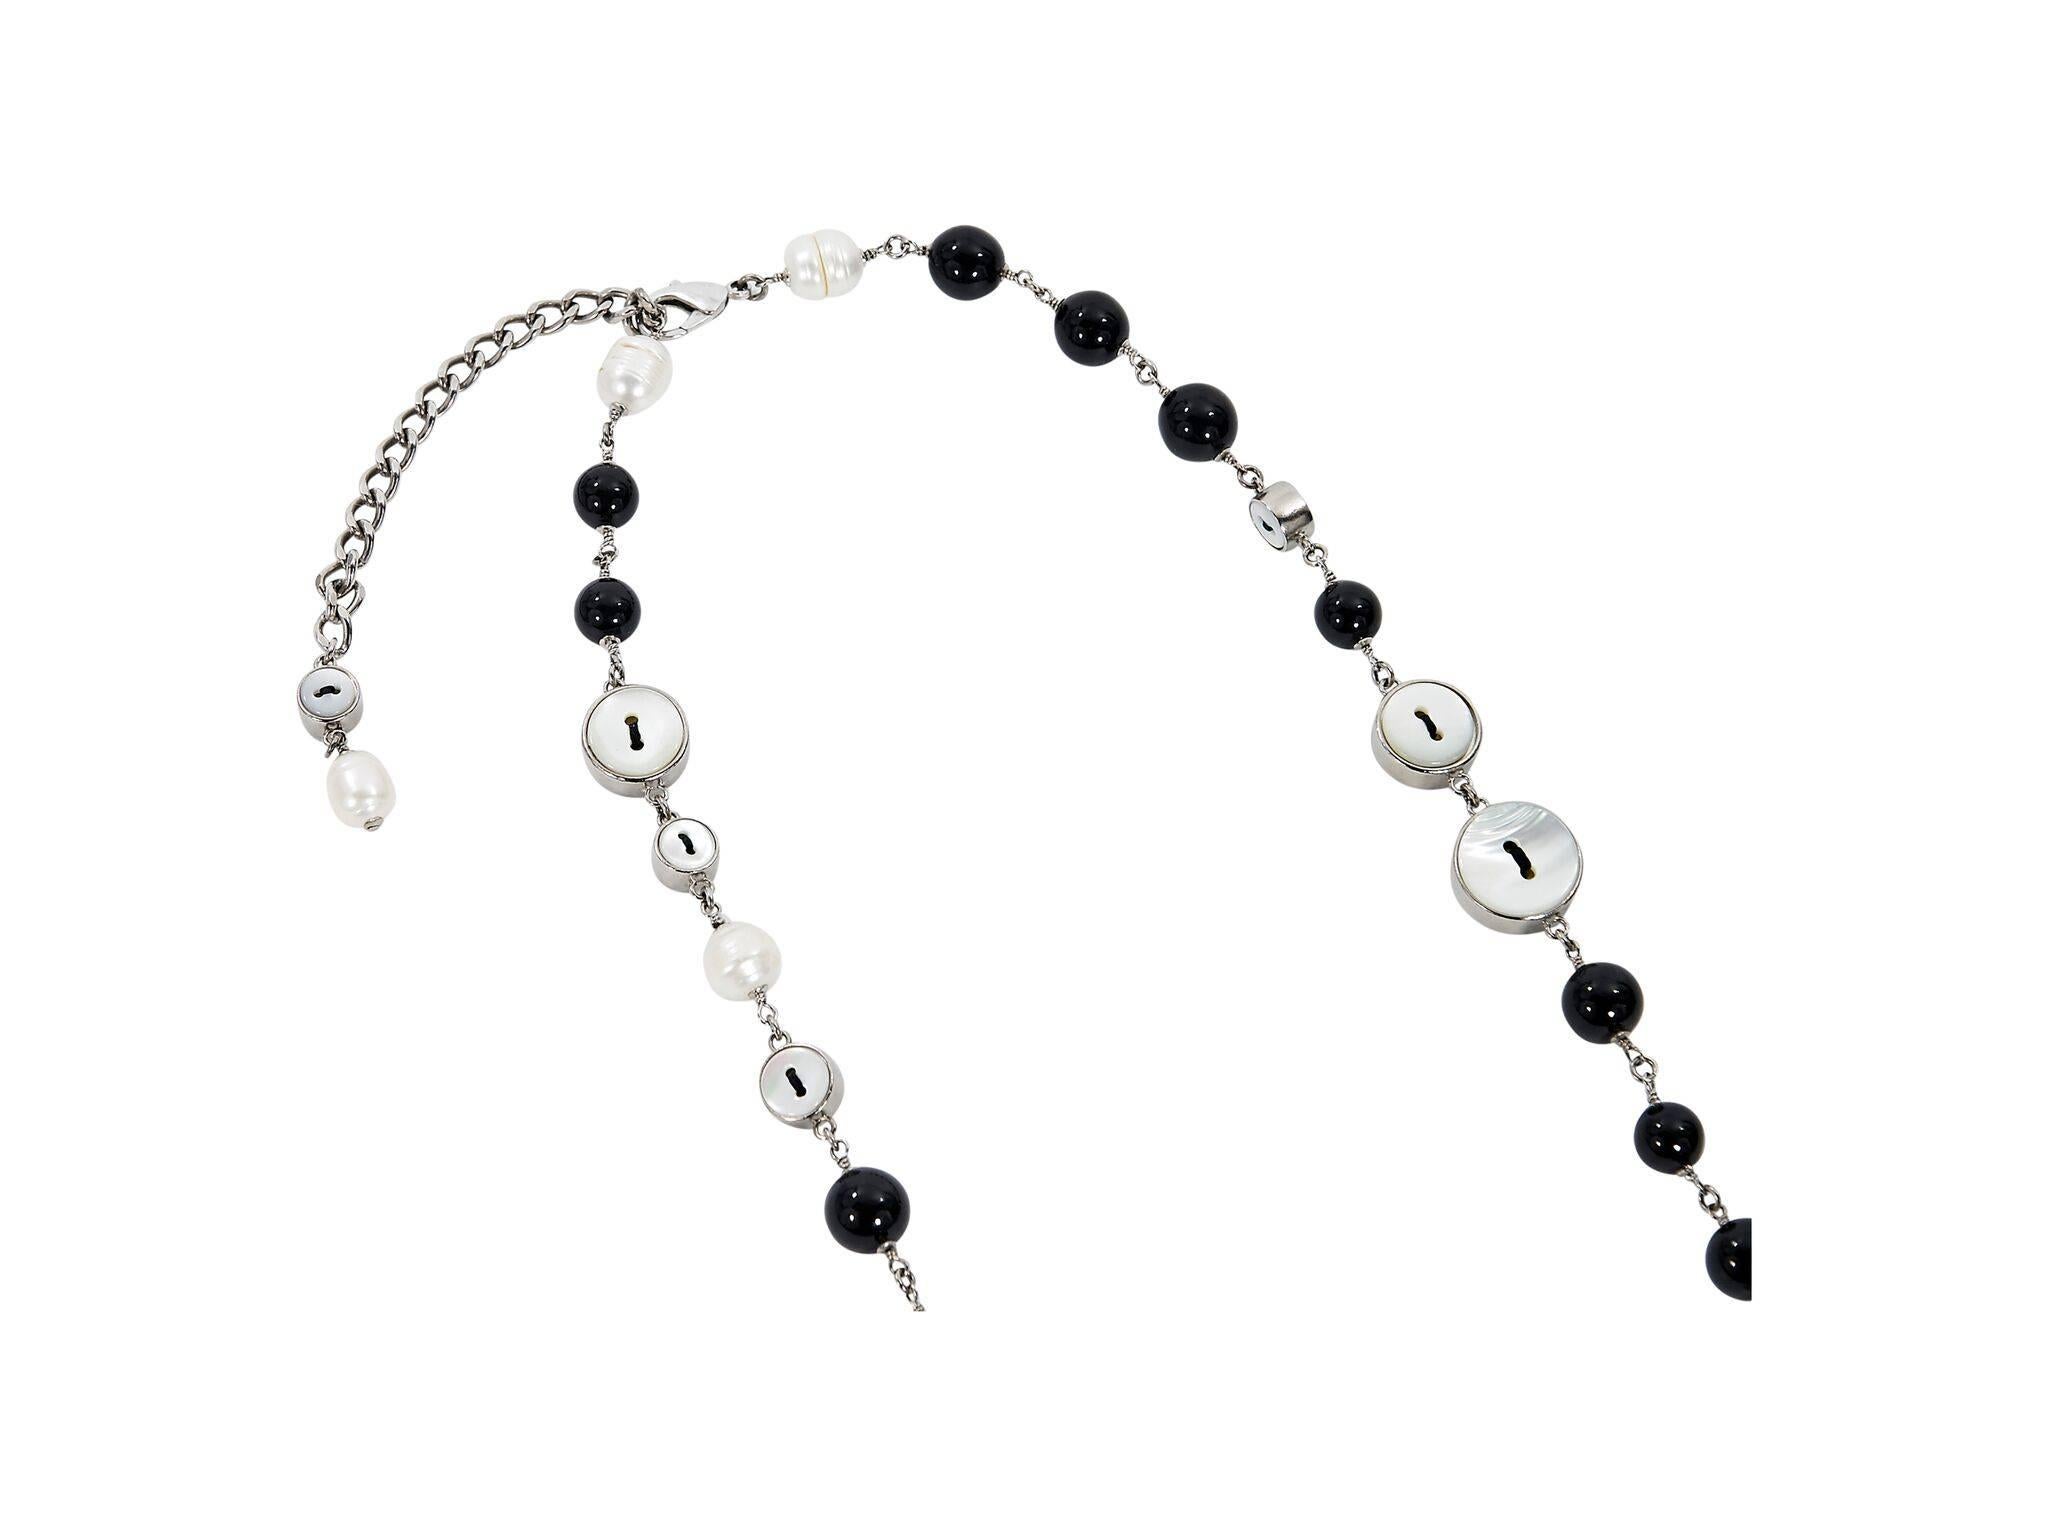 Women's Chanel Multi-Strand Beaded Necklace